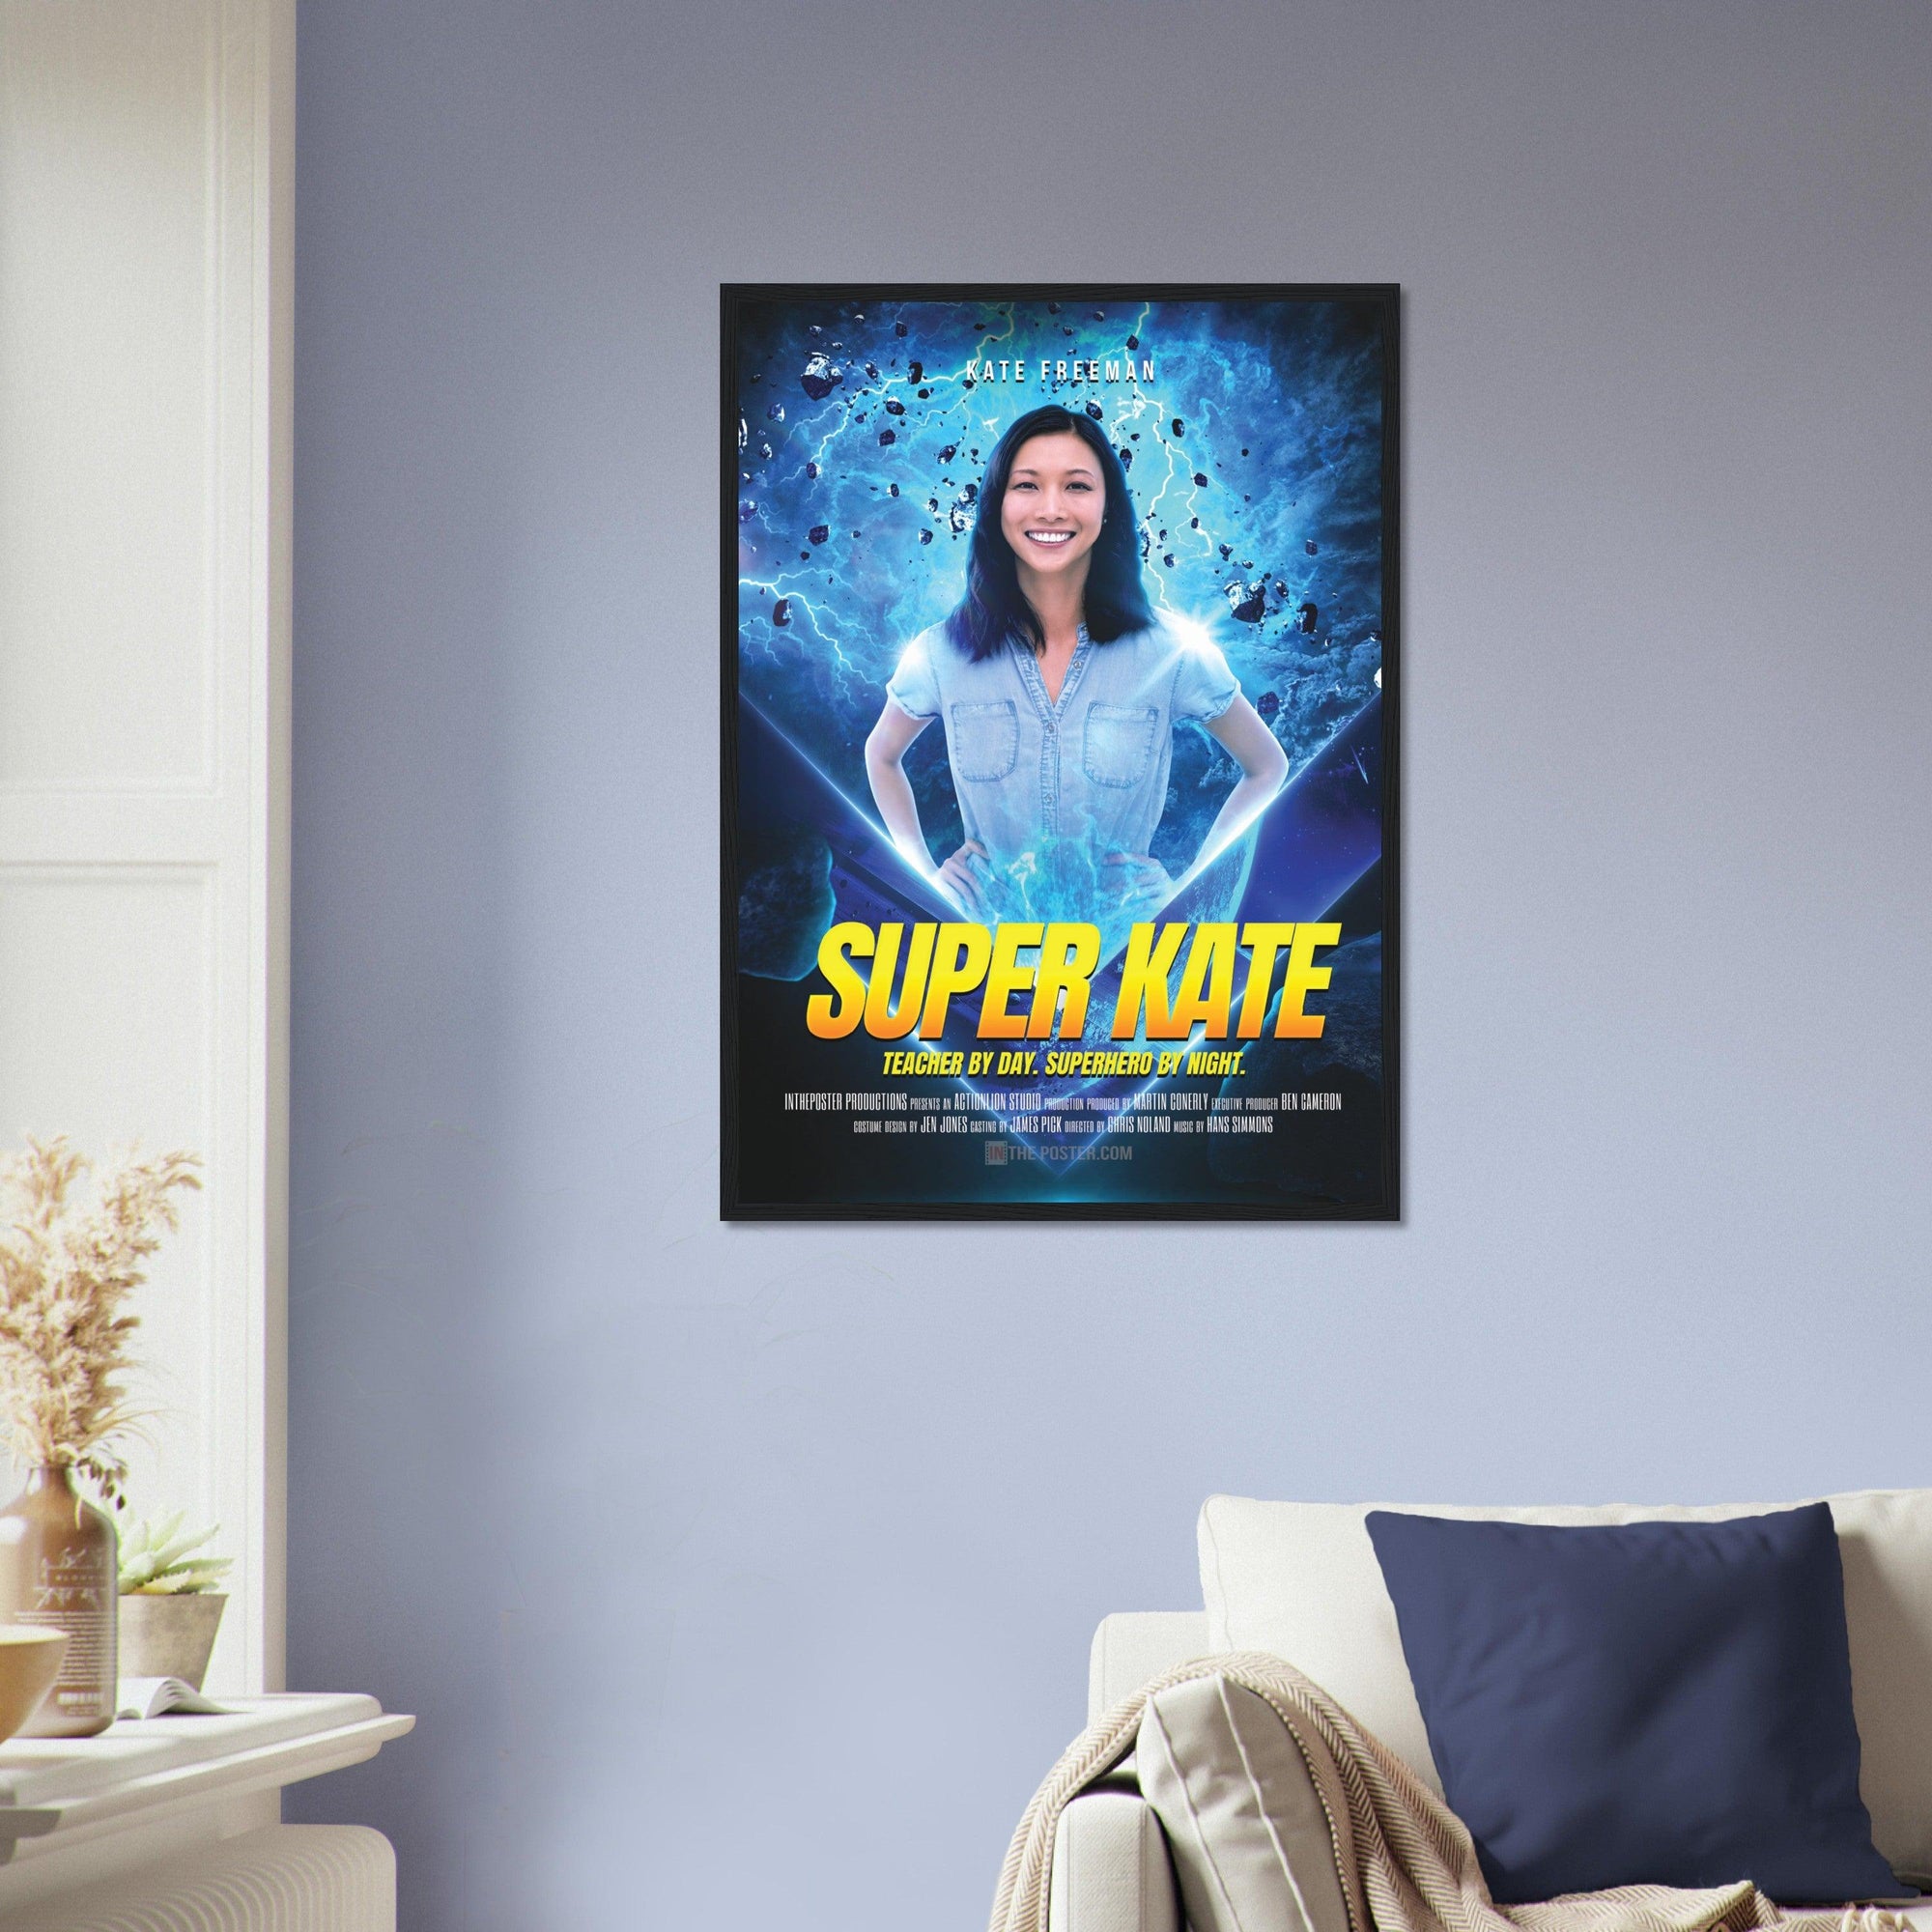 The Super Hero Custom Movie Poster design in a black frame in size regular, on the wall above a beige sofa and blue cushion